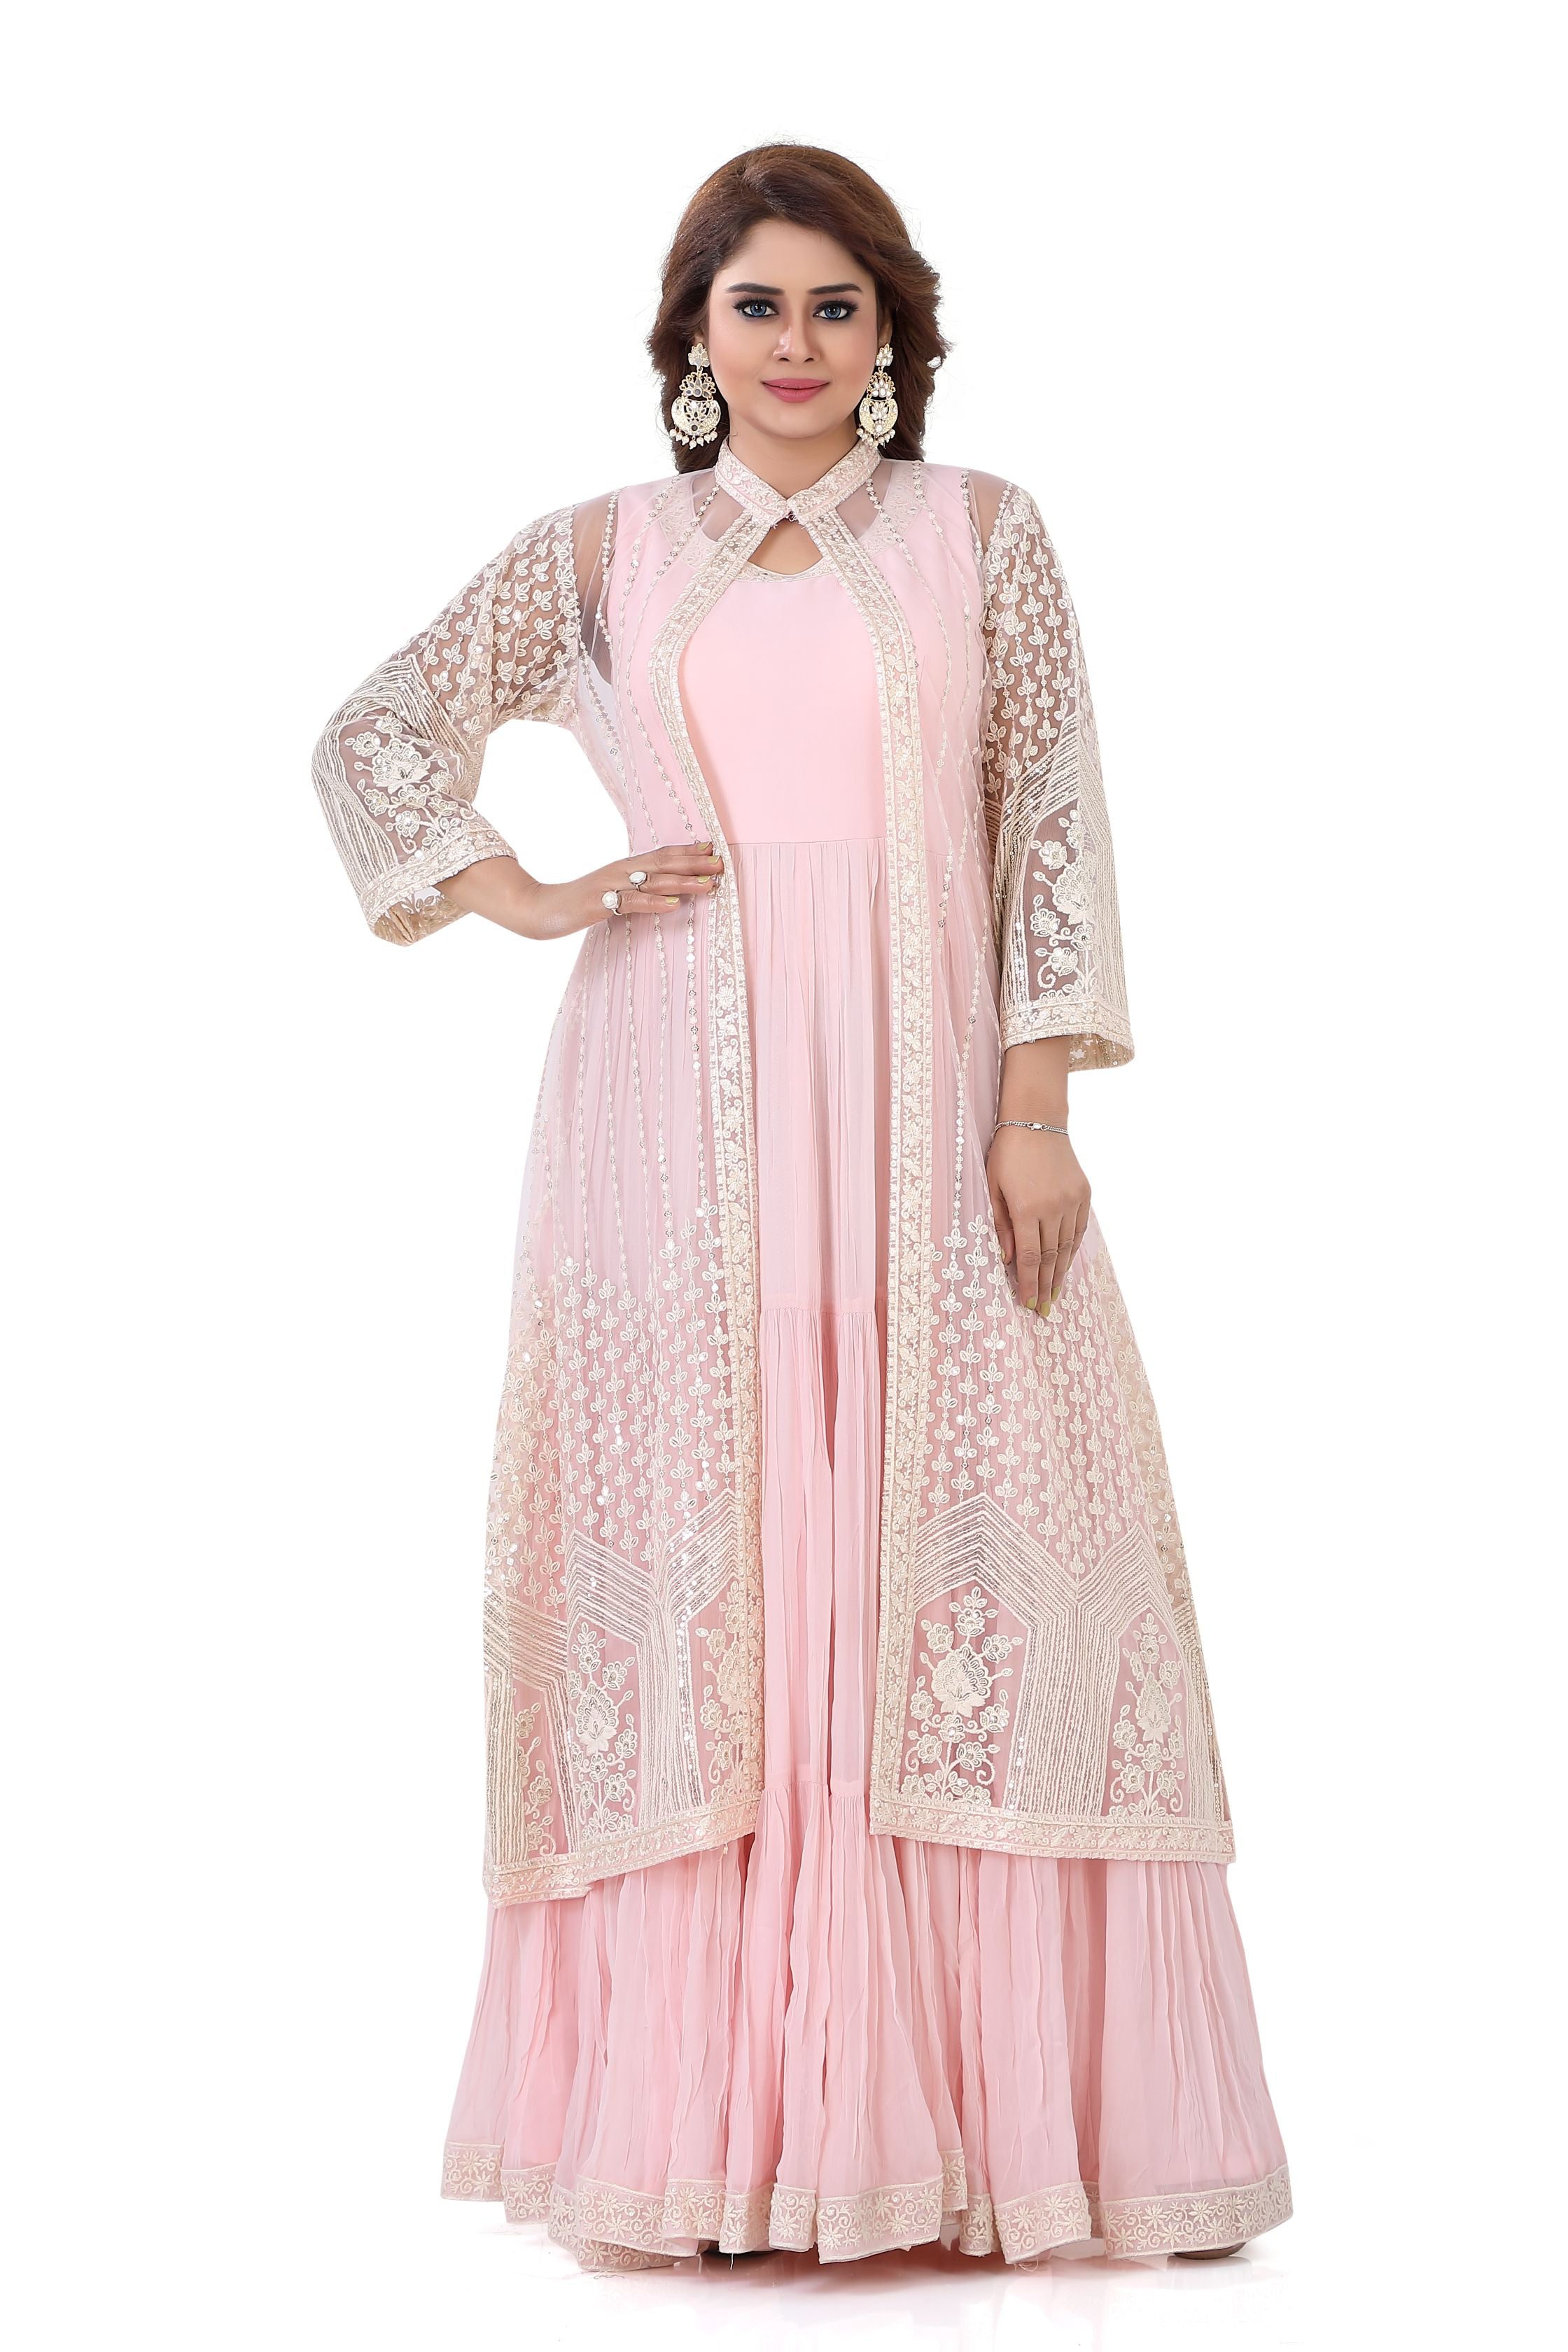 Indo western thread embroidery Gown in Light Pink